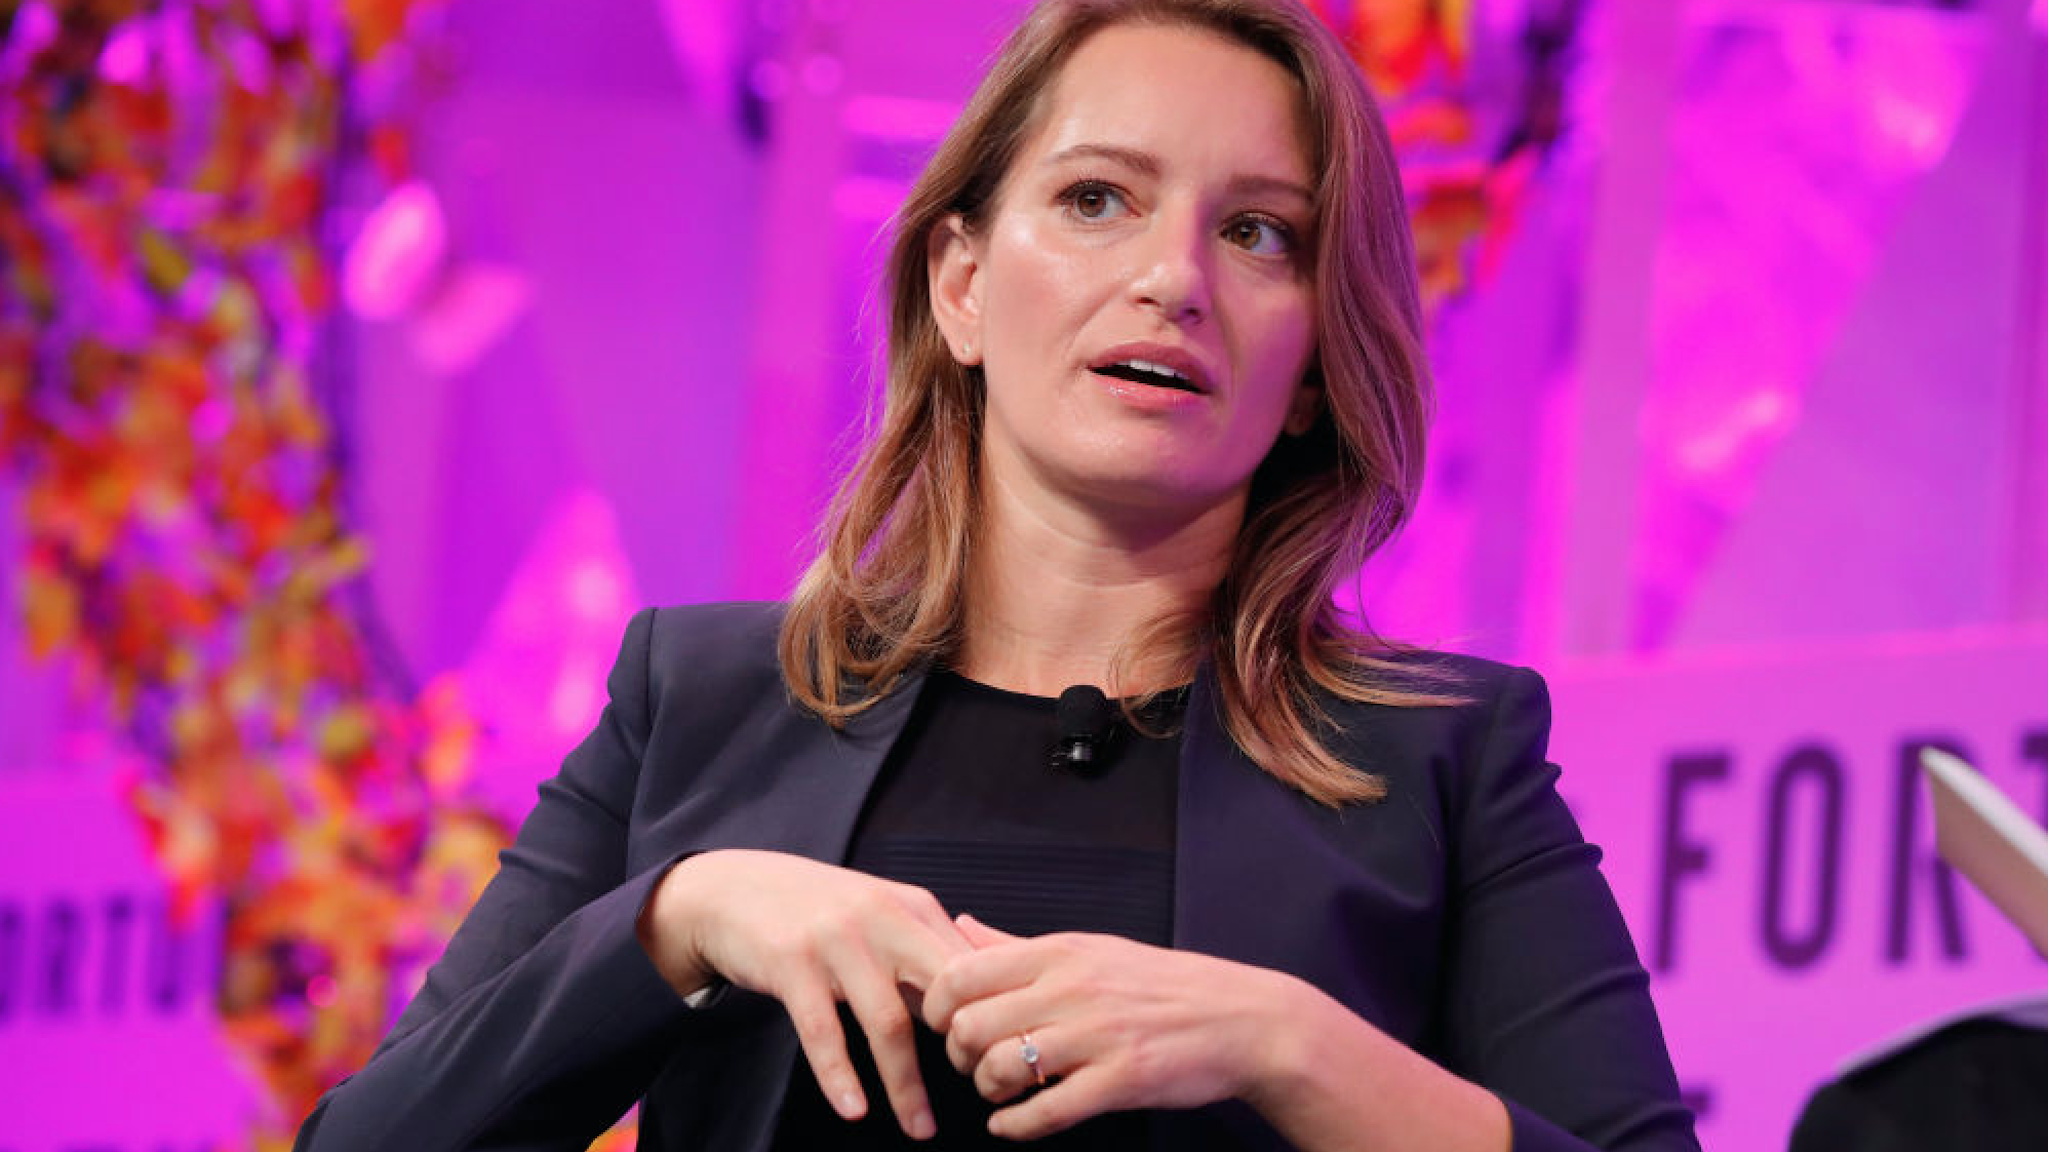 MSNBC Anchor and NBC News Correspondent Katy Tur speaks onstage at the Fortune Most Powerful Women Summit - Day 3 on October 11, 2017 in Washington, DC.